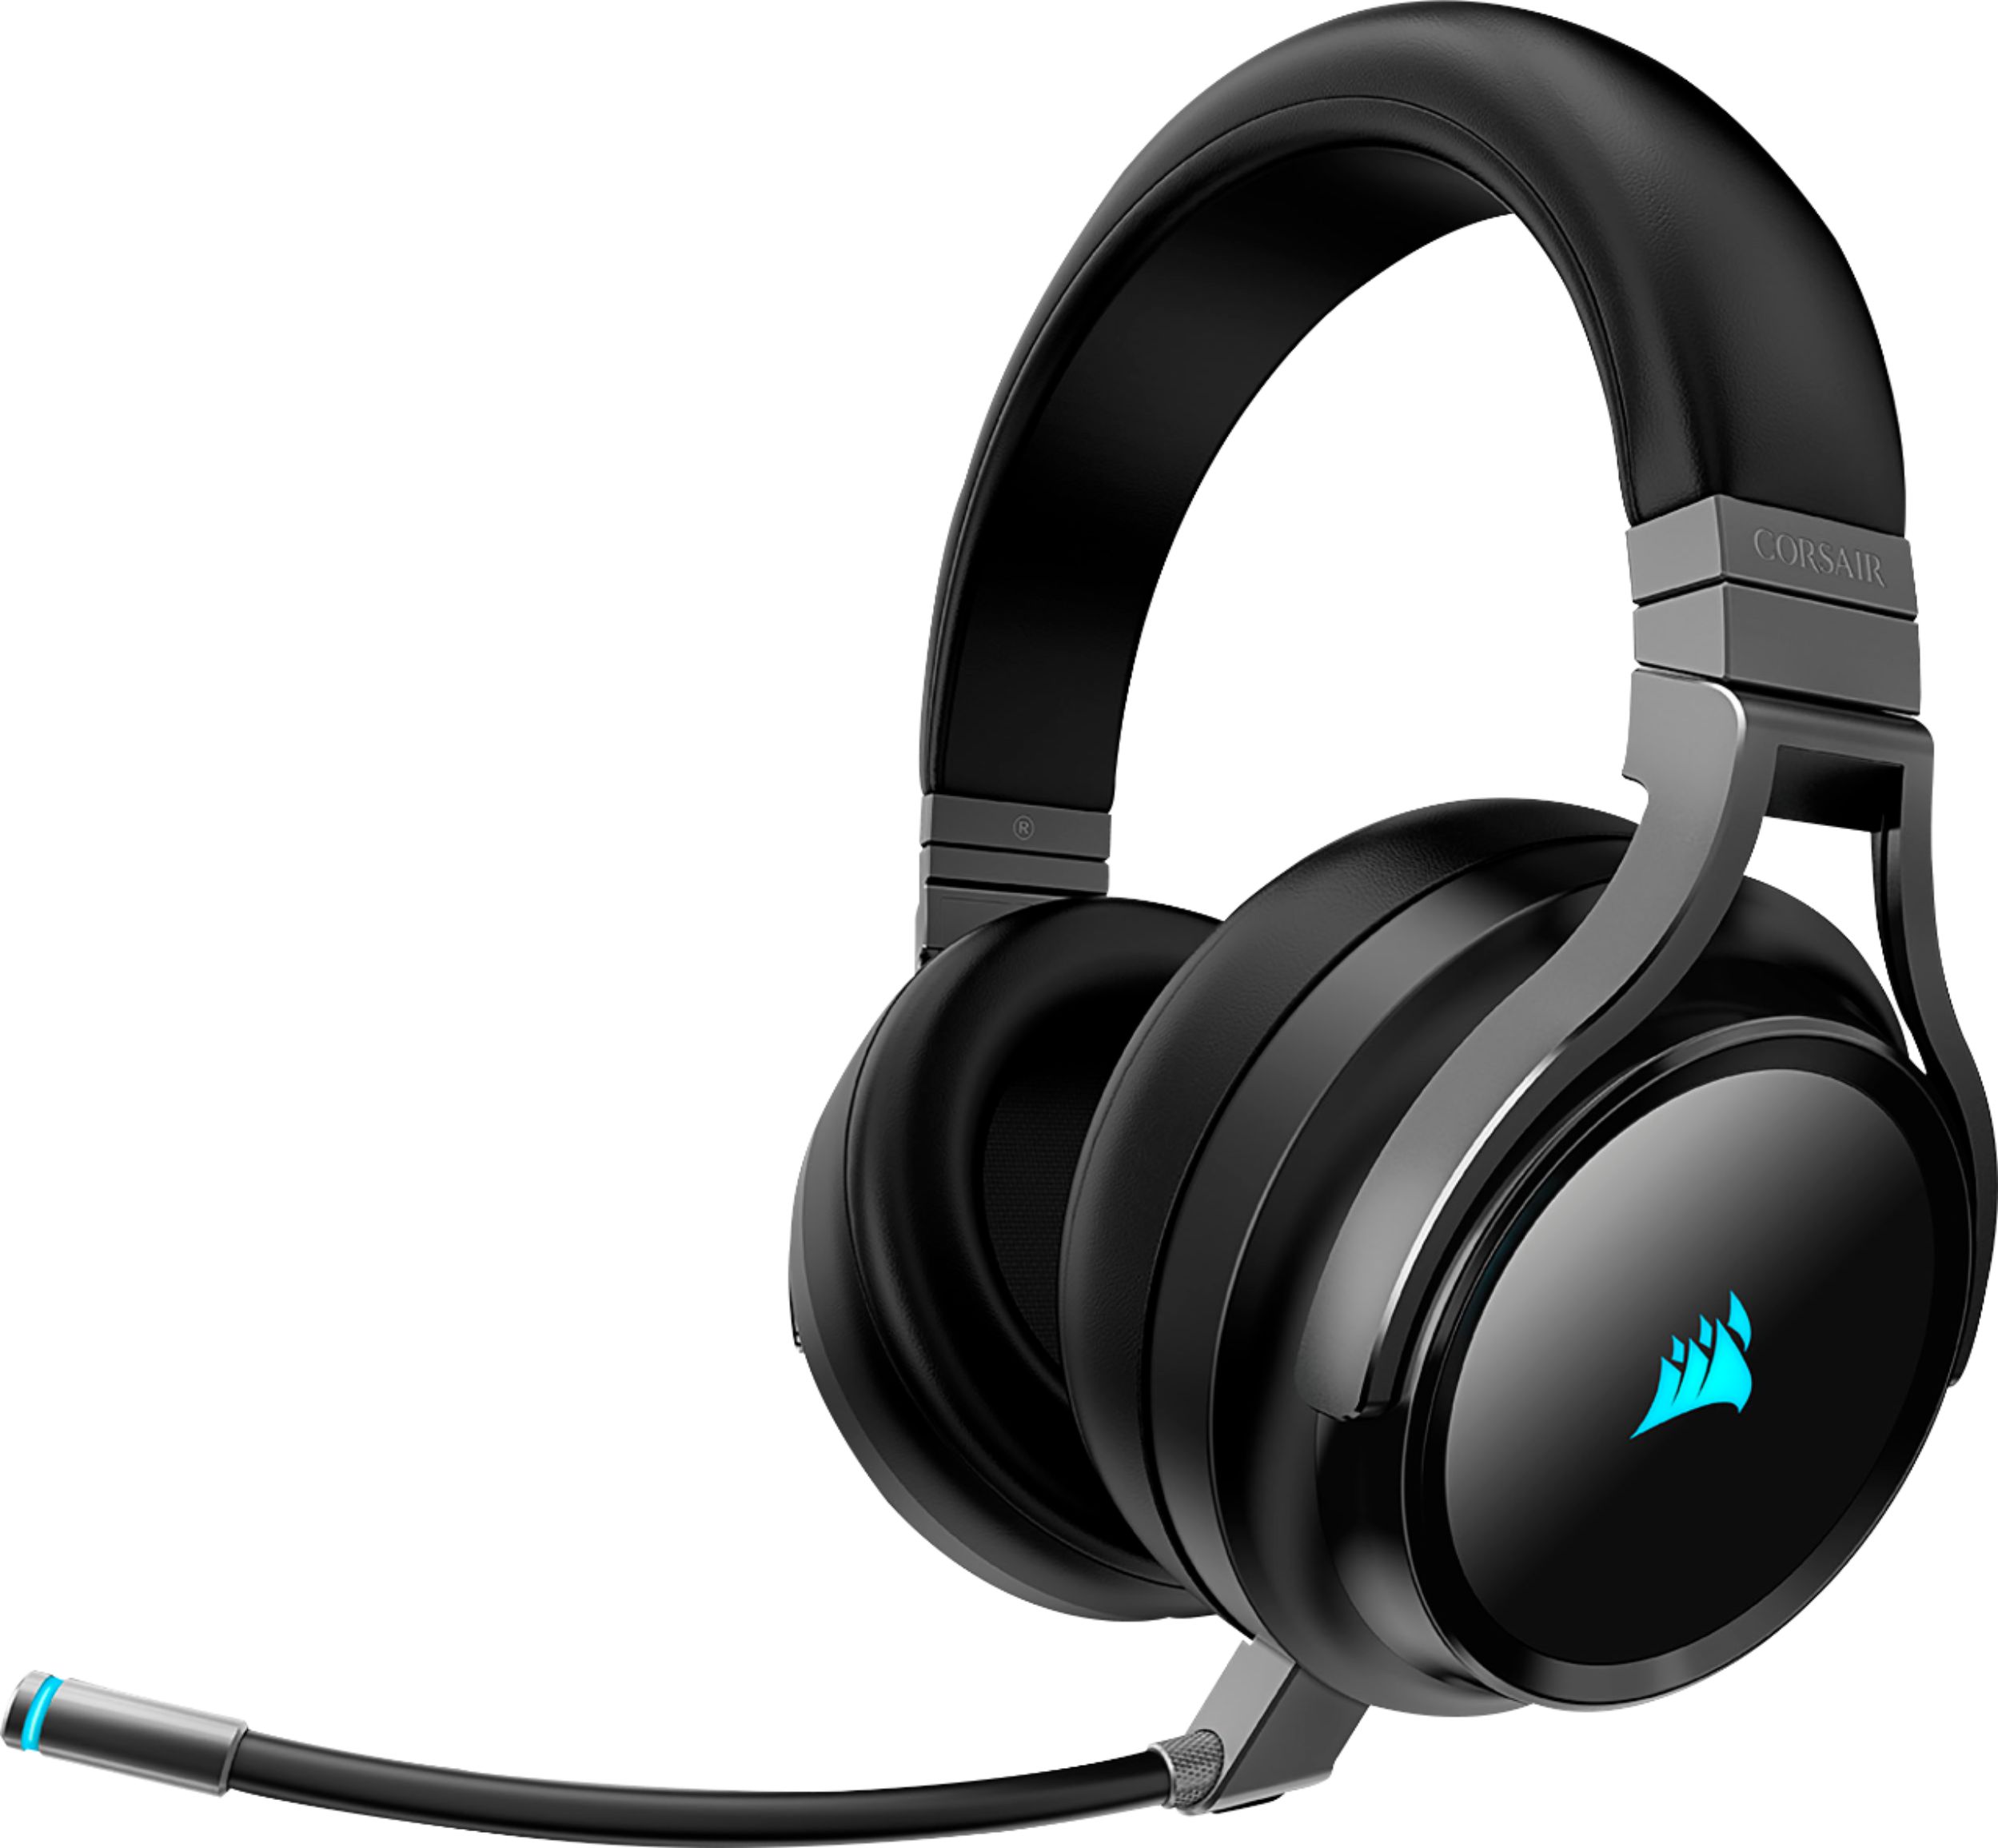 Angle View: CORSAIR - VIRTUOSO RGB Wireless Stereo Gaming Headset - Carbon